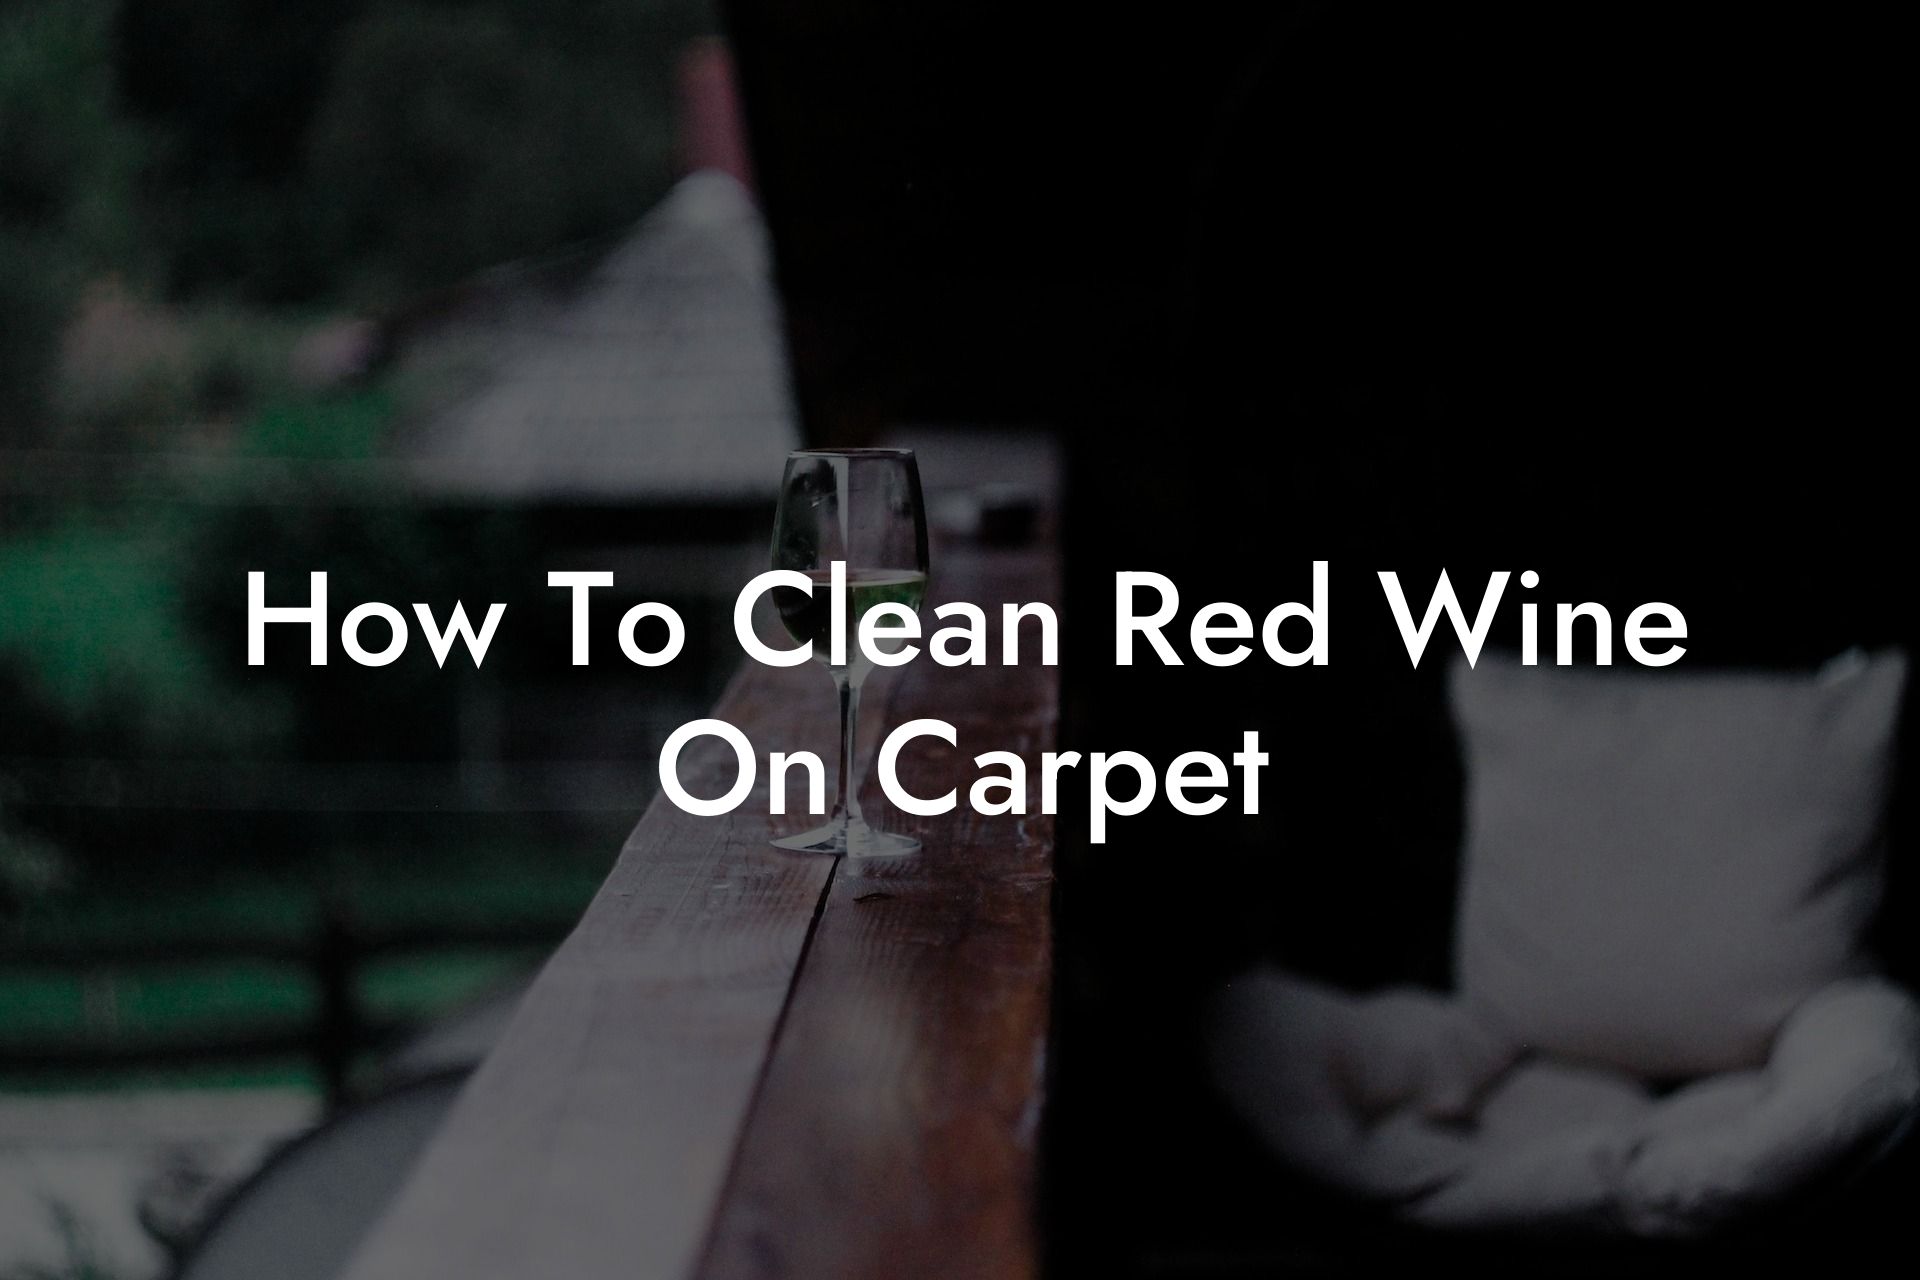 How To Clean Red Wine On Carpet